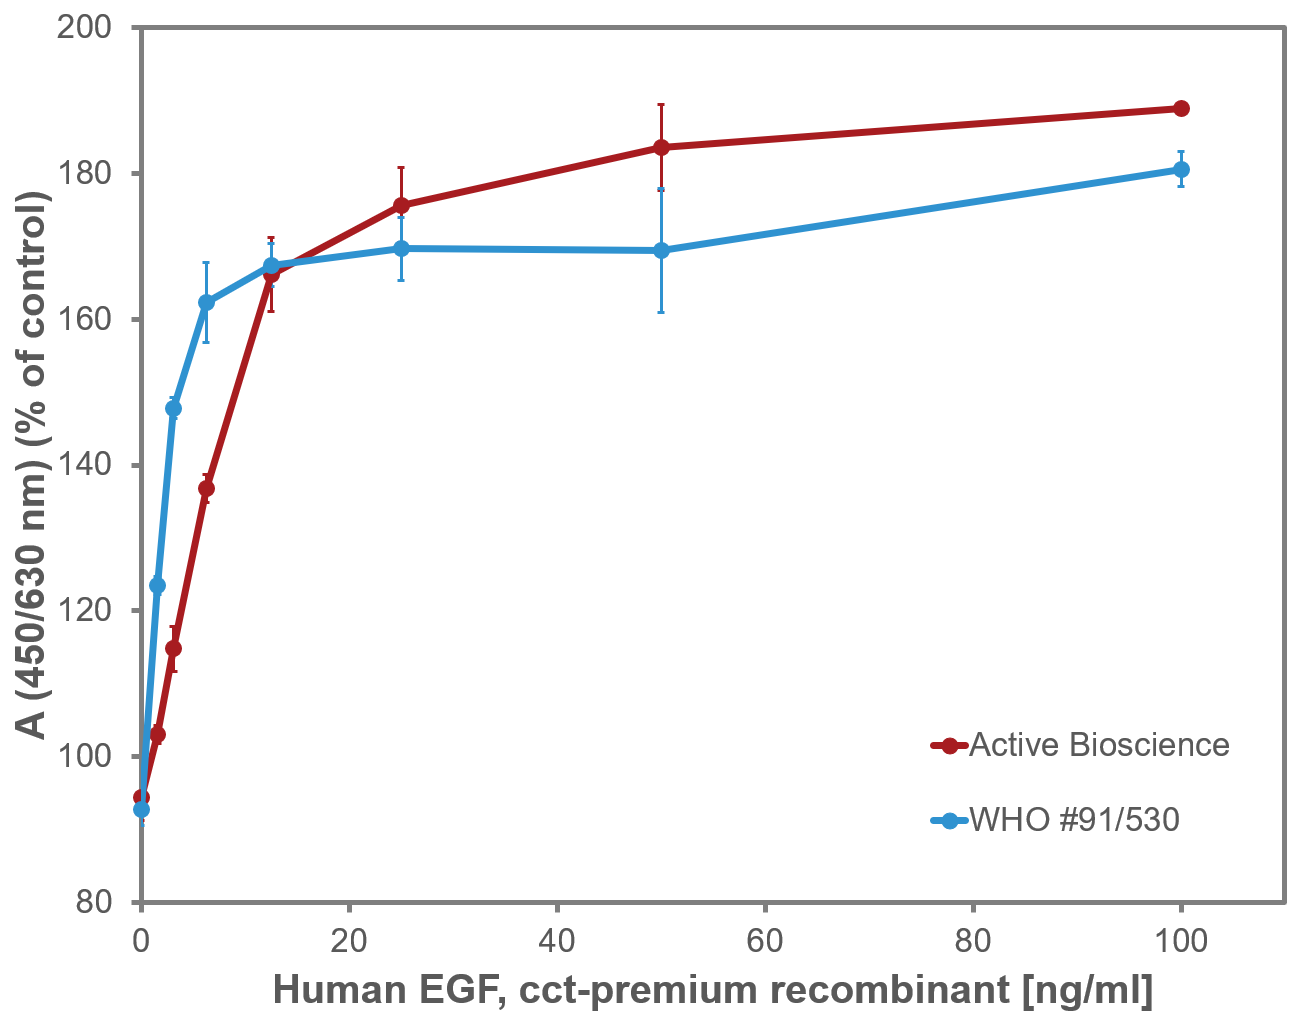 <strong>Fig. 2</strong>: Measurement of the dose-dependent stimulation of cell proliferation in Normal Human Dermal Fibroblast (NHDF) cells by recombinant human EGF, cct-premium and WHO standard 91/530. Values are the means (�SD) of triplicate determinations and expressed as percentage of control.